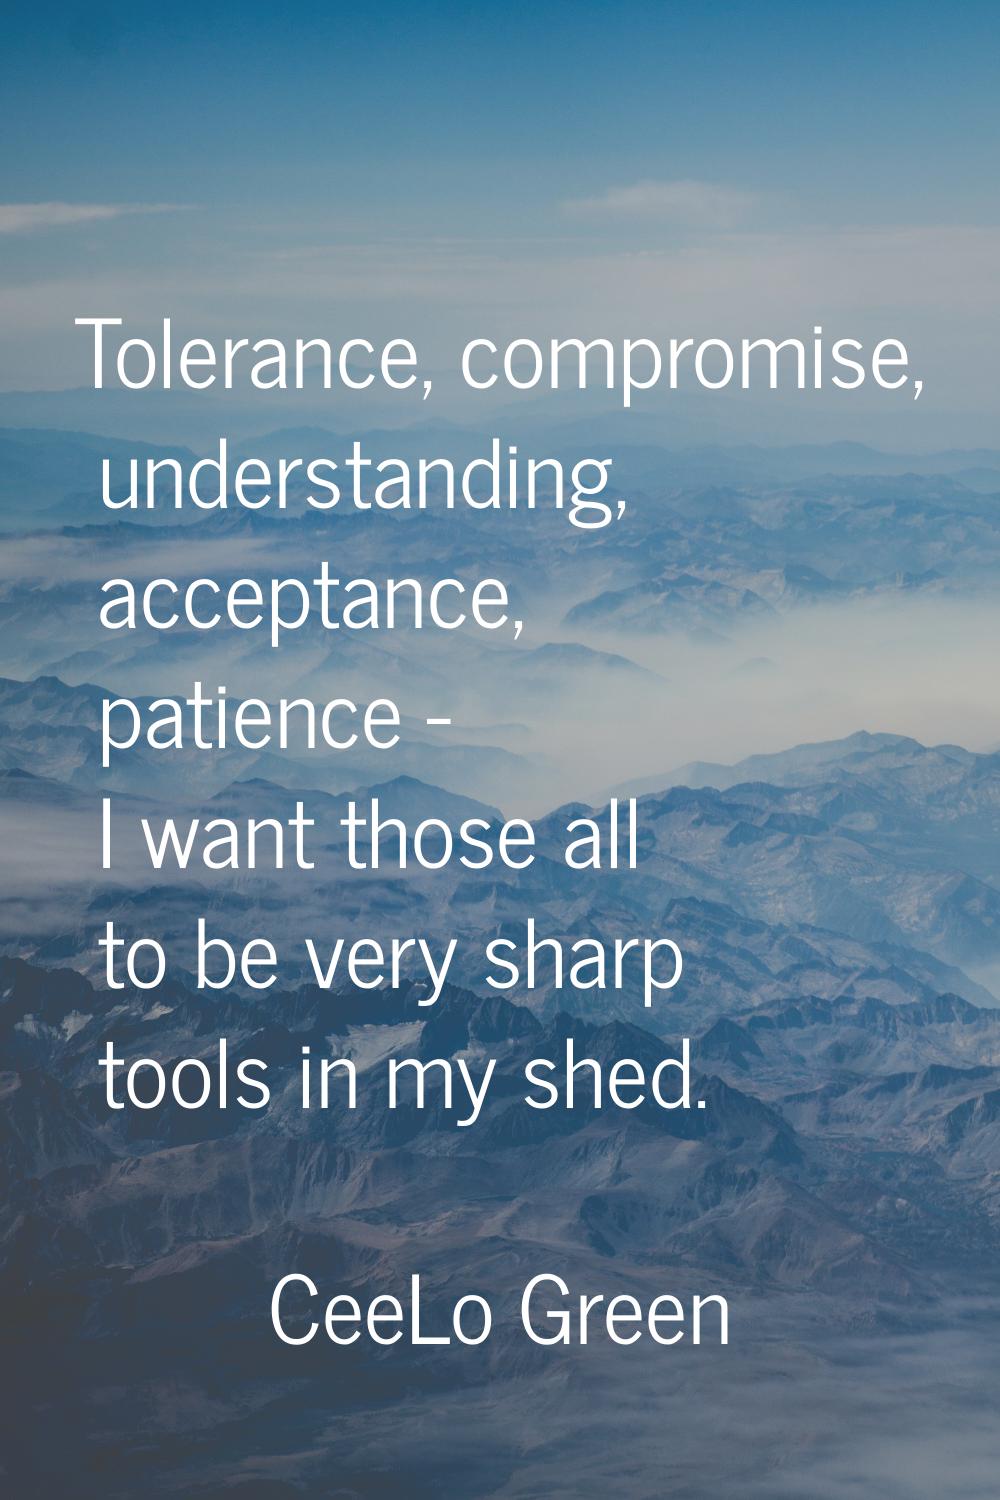 Tolerance, compromise, understanding, acceptance, patience - I want those all to be very sharp tool